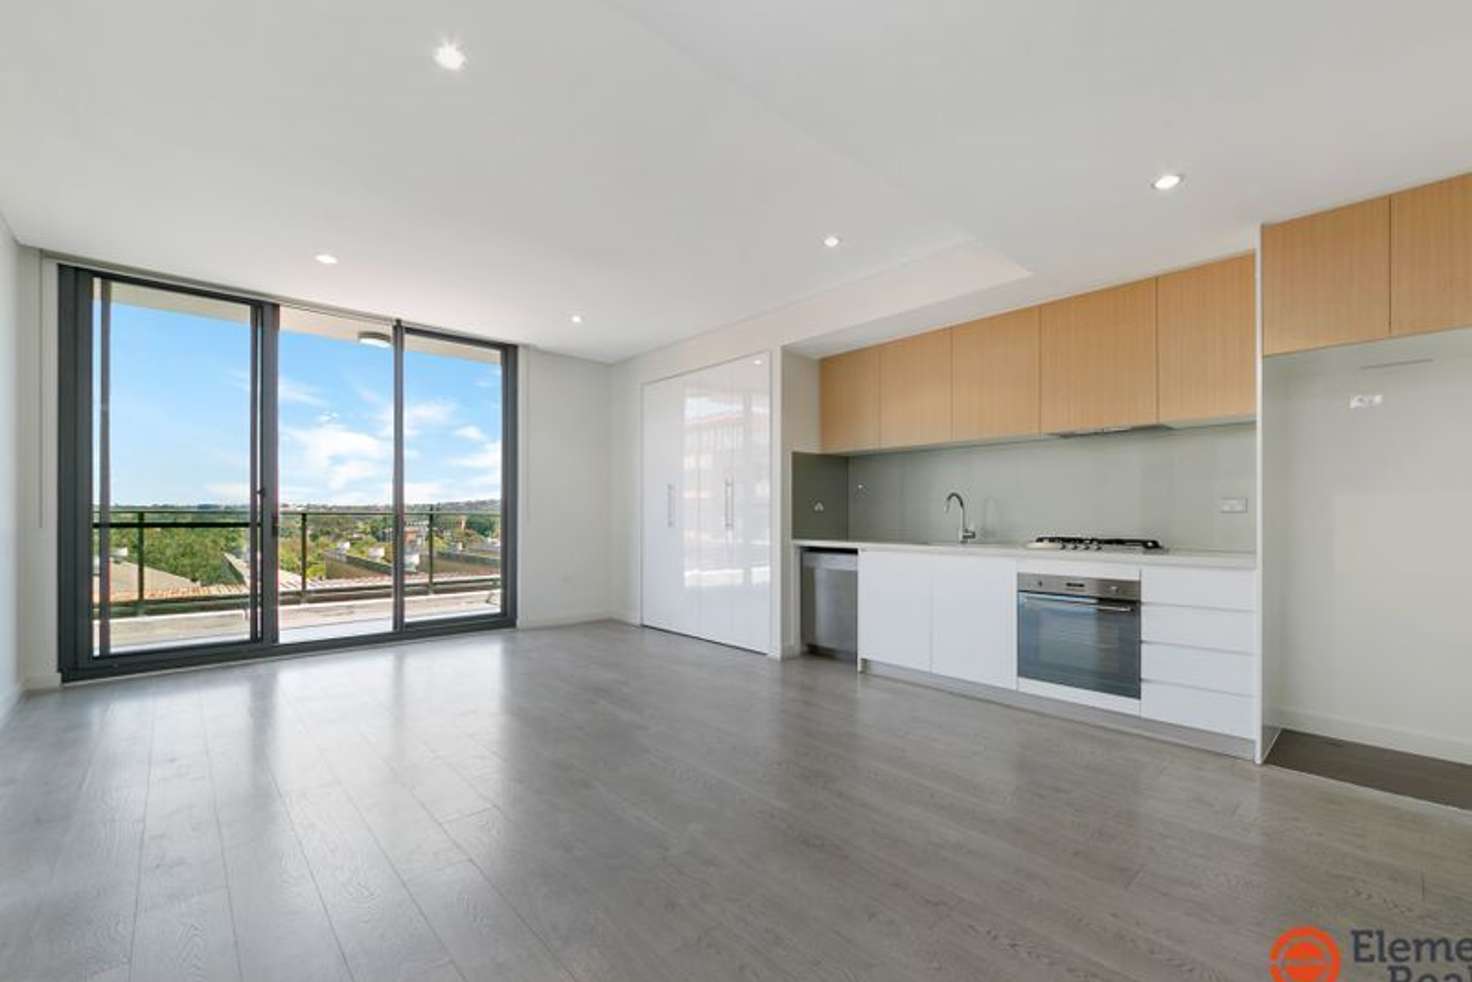 Main view of Homely apartment listing, 1601/13 Angas Street, Meadowbank NSW 2114